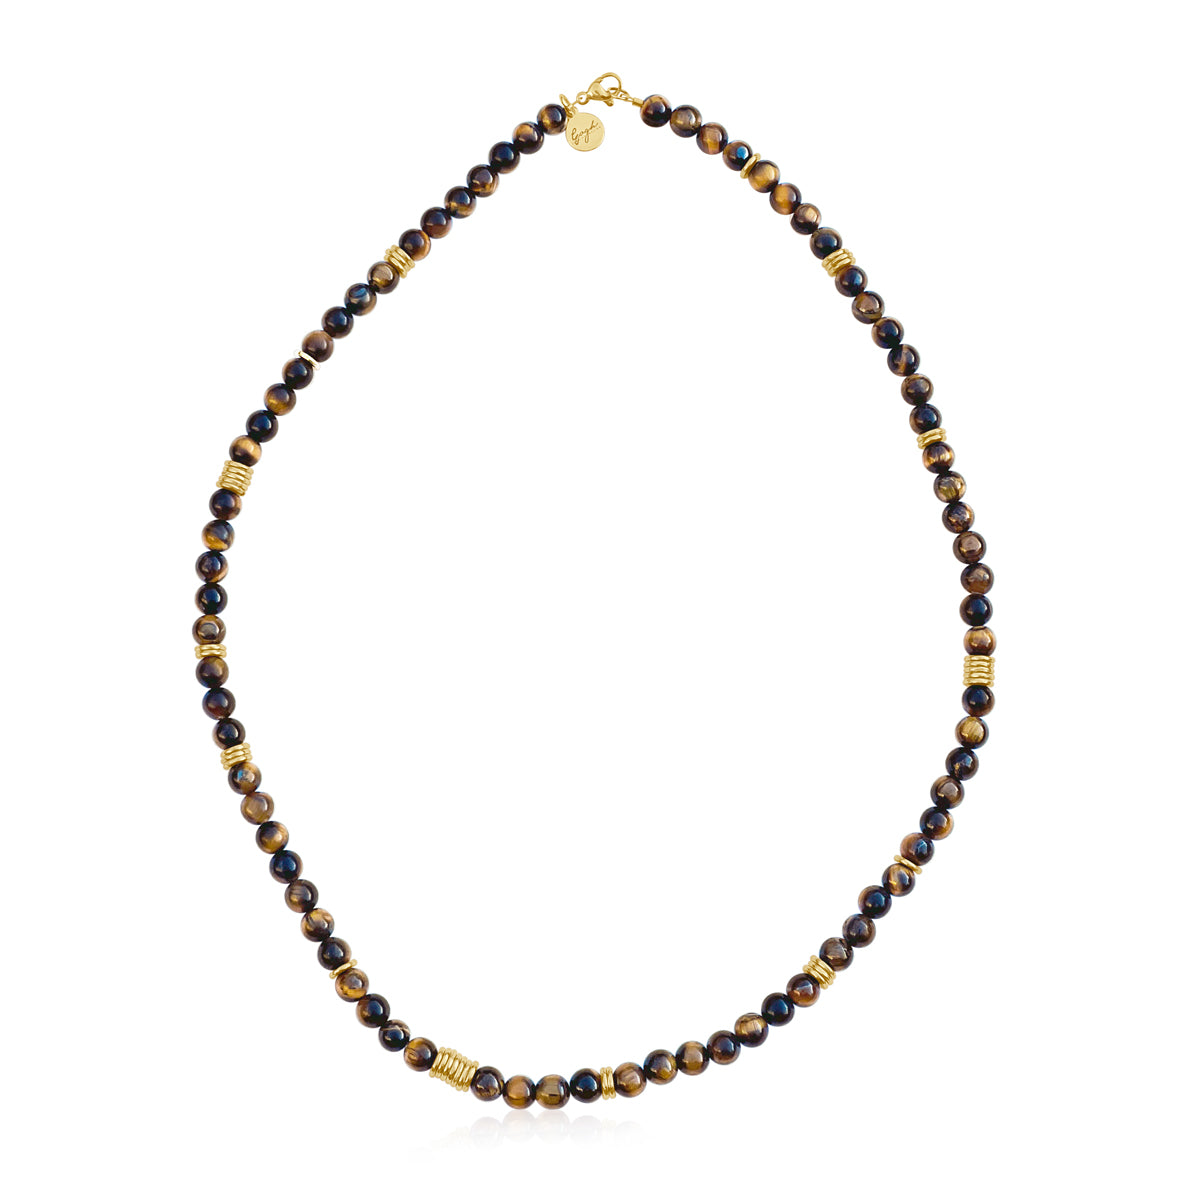 The "Leader of Courage" Tiger Eye Necklace invites you to embrace the leadership qualities of courage, wisdom, and determination. Wear it with pride as a reminder of your inner strength and the unwavering courage to face life's journey with resilience and grace.